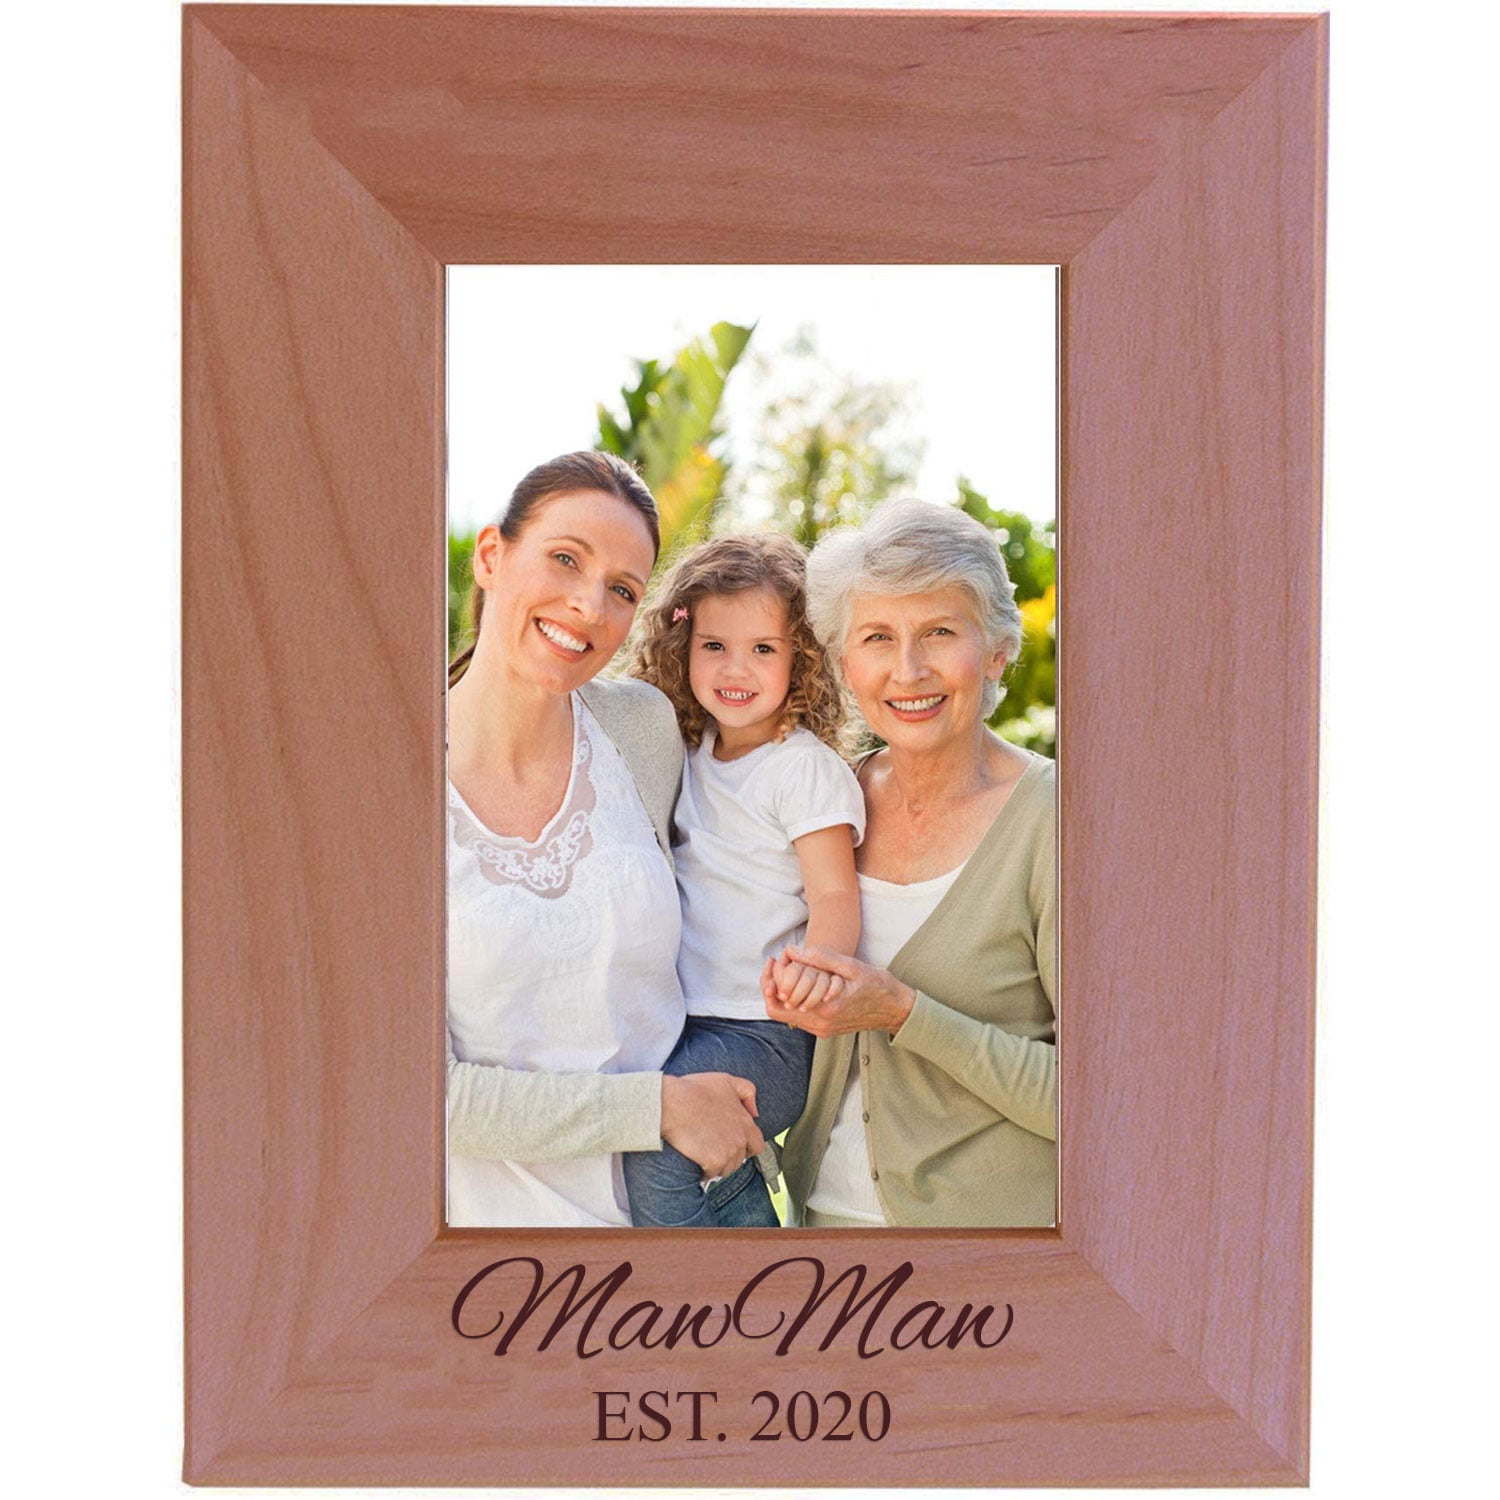 5x7 PERSONALIZED CUSTOM NEW BORN BABY ALDERWOOD PICTURE FRAME GIFT send detail 